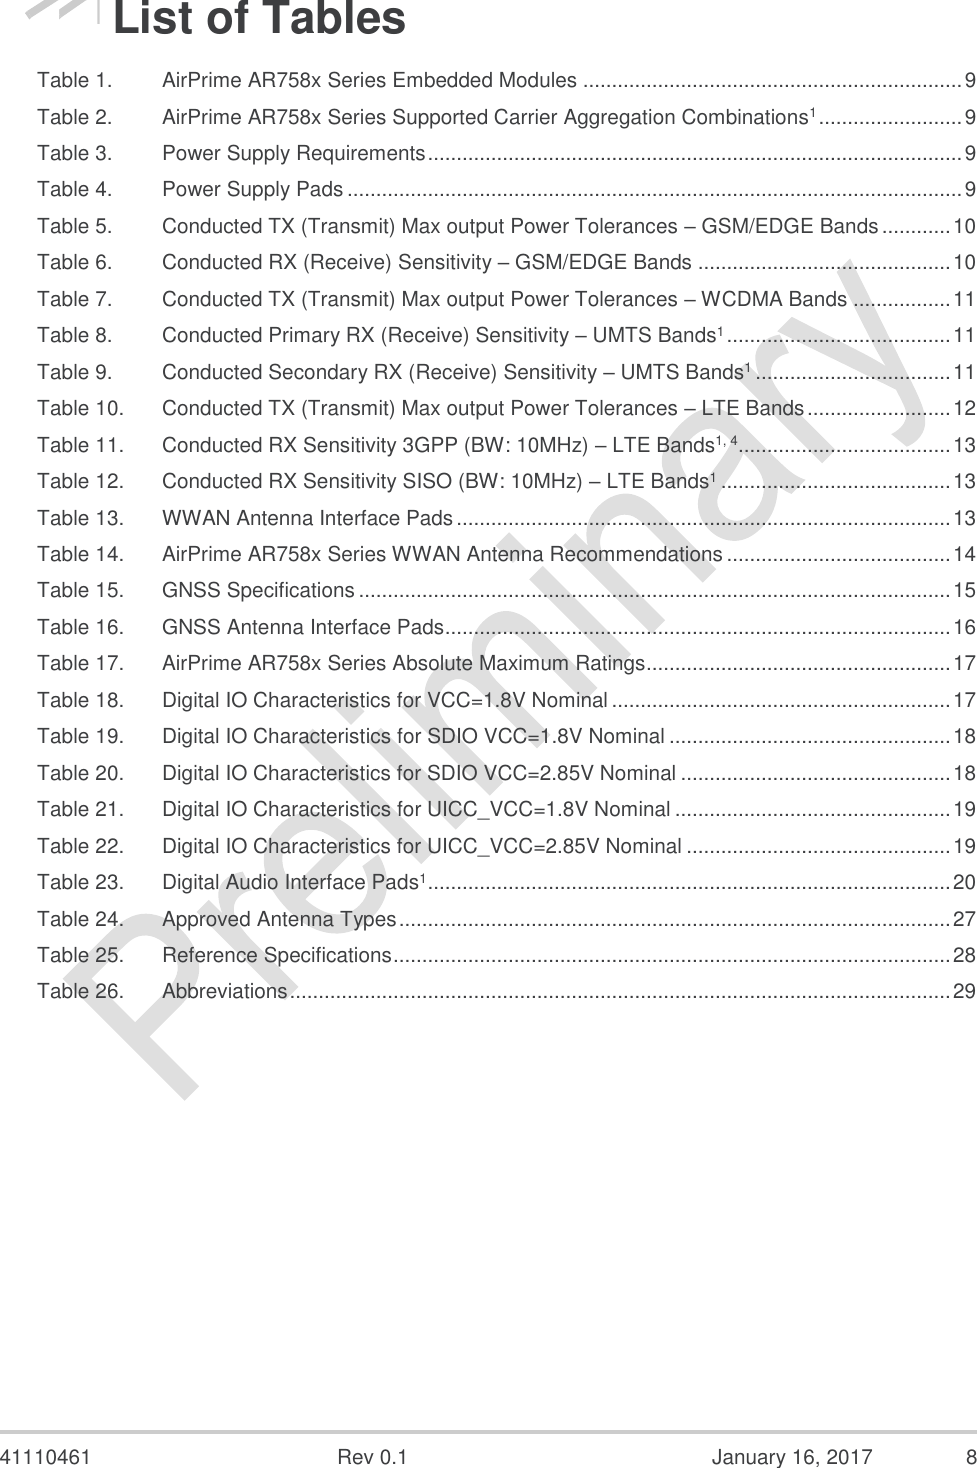  41110461  Rev 0.1  January 16, 2017  8 List of Tables Table 1. AirPrime AR758x Series Embedded Modules .................................................................. 9 Table 2. AirPrime AR758x Series Supported Carrier Aggregation Combinations1 ......................... 9 Table 3. Power Supply Requirements ............................................................................................. 9 Table 4. Power Supply Pads ........................................................................................................... 9 Table 5. Conducted TX (Transmit) Max output Power Tolerances – GSM/EDGE Bands ............ 10 Table 6. Conducted RX (Receive) Sensitivity – GSM/EDGE Bands ............................................ 10 Table 7. Conducted TX (Transmit) Max output Power Tolerances – WCDMA Bands ................. 11 Table 8. Conducted Primary RX (Receive) Sensitivity – UMTS Bands1 ....................................... 11 Table 9. Conducted Secondary RX (Receive) Sensitivity – UMTS Bands1 .................................. 11 Table 10. Conducted TX (Transmit) Max output Power Tolerances – LTE Bands ......................... 12 Table 11. Conducted RX Sensitivity 3GPP (BW: 10MHz) – LTE Bands1, 4..................................... 13 Table 12. Conducted RX Sensitivity SISO (BW: 10MHz) – LTE Bands1 ........................................ 13 Table 13. WWAN Antenna Interface Pads ...................................................................................... 13 Table 14. AirPrime AR758x Series WWAN Antenna Recommendations ....................................... 14 Table 15. GNSS Specifications ....................................................................................................... 15 Table 16. GNSS Antenna Interface Pads ........................................................................................ 16 Table 17. AirPrime AR758x Series Absolute Maximum Ratings..................................................... 17 Table 18. Digital IO Characteristics for VCC=1.8V Nominal ........................................................... 17 Table 19. Digital IO Characteristics for SDIO VCC=1.8V Nominal ................................................. 18 Table 20. Digital IO Characteristics for SDIO VCC=2.85V Nominal ............................................... 18 Table 21. Digital IO Characteristics for UICC_VCC=1.8V Nominal ................................................ 19 Table 22. Digital IO Characteristics for UICC_VCC=2.85V Nominal .............................................. 19 Table 23. Digital Audio Interface Pads1 ........................................................................................... 20 Table 24. Approved Antenna Types ................................................................................................ 27 Table 25. Reference Specifications ................................................................................................. 28 Table 26. Abbreviations ................................................................................................................... 29  